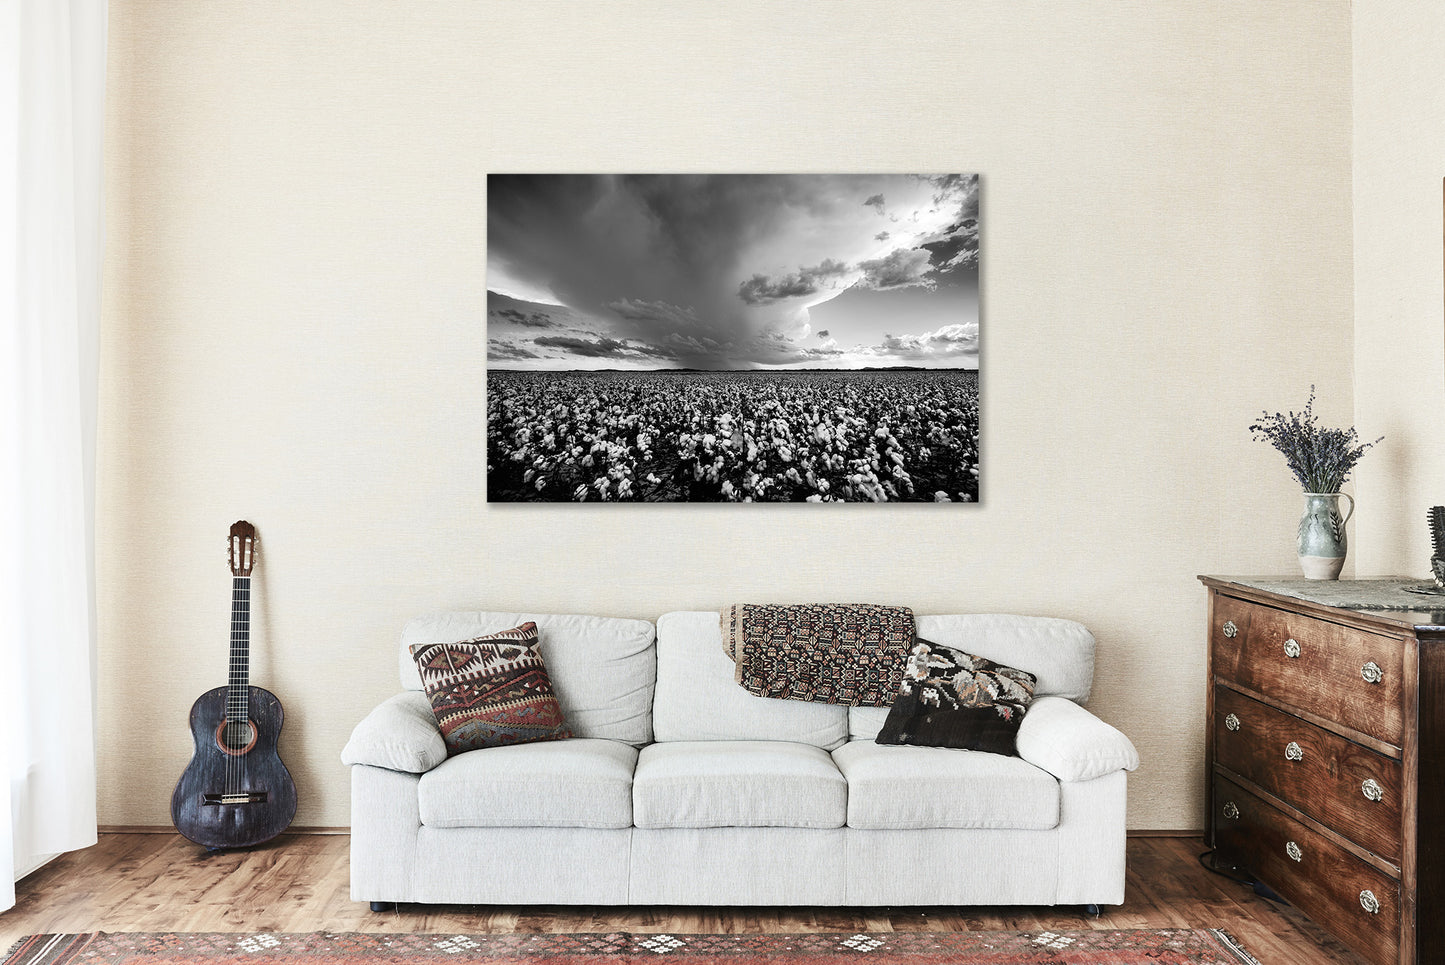 Farm Canvas Wall Art - Black and White Gallery Wrap of Thunderstorm Over Cotton Field in Oklahoma - Country Farmhouse Artwork Decor